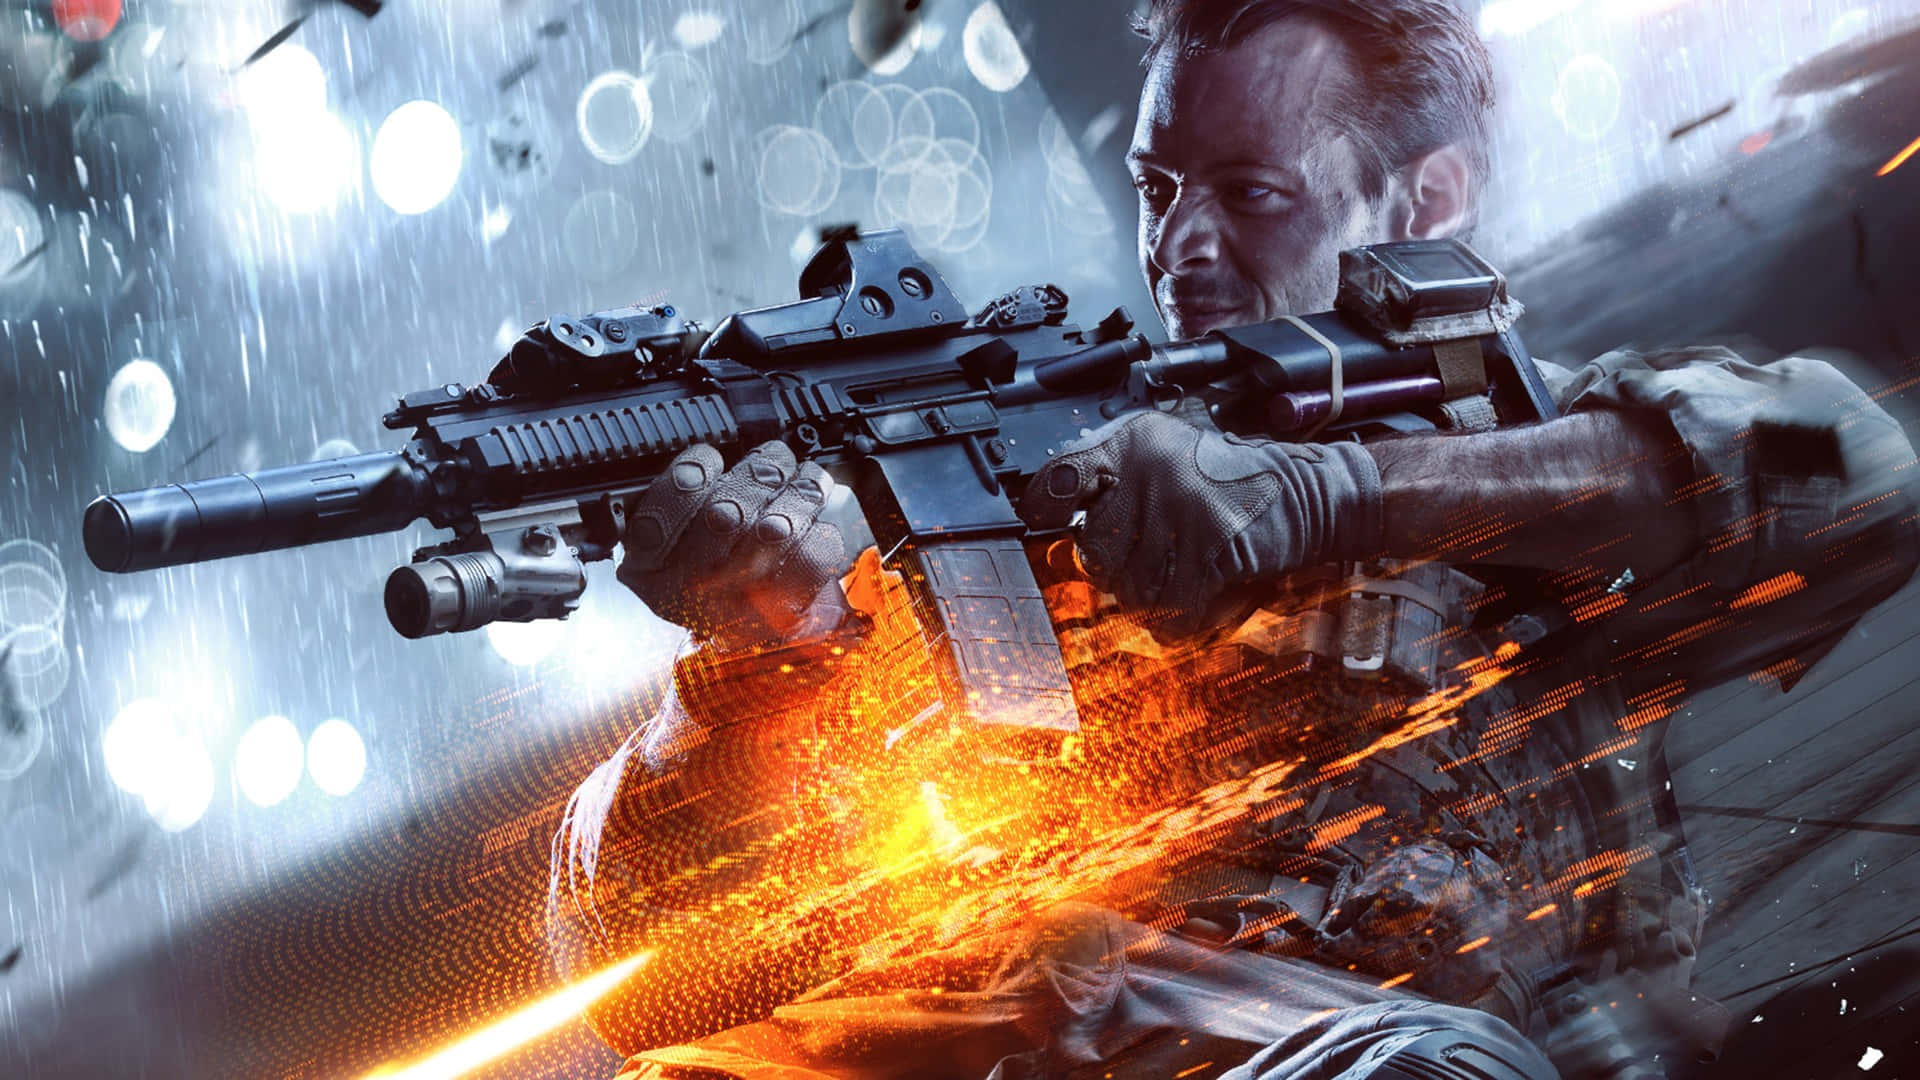 Experience the thrills of war in Battlefield